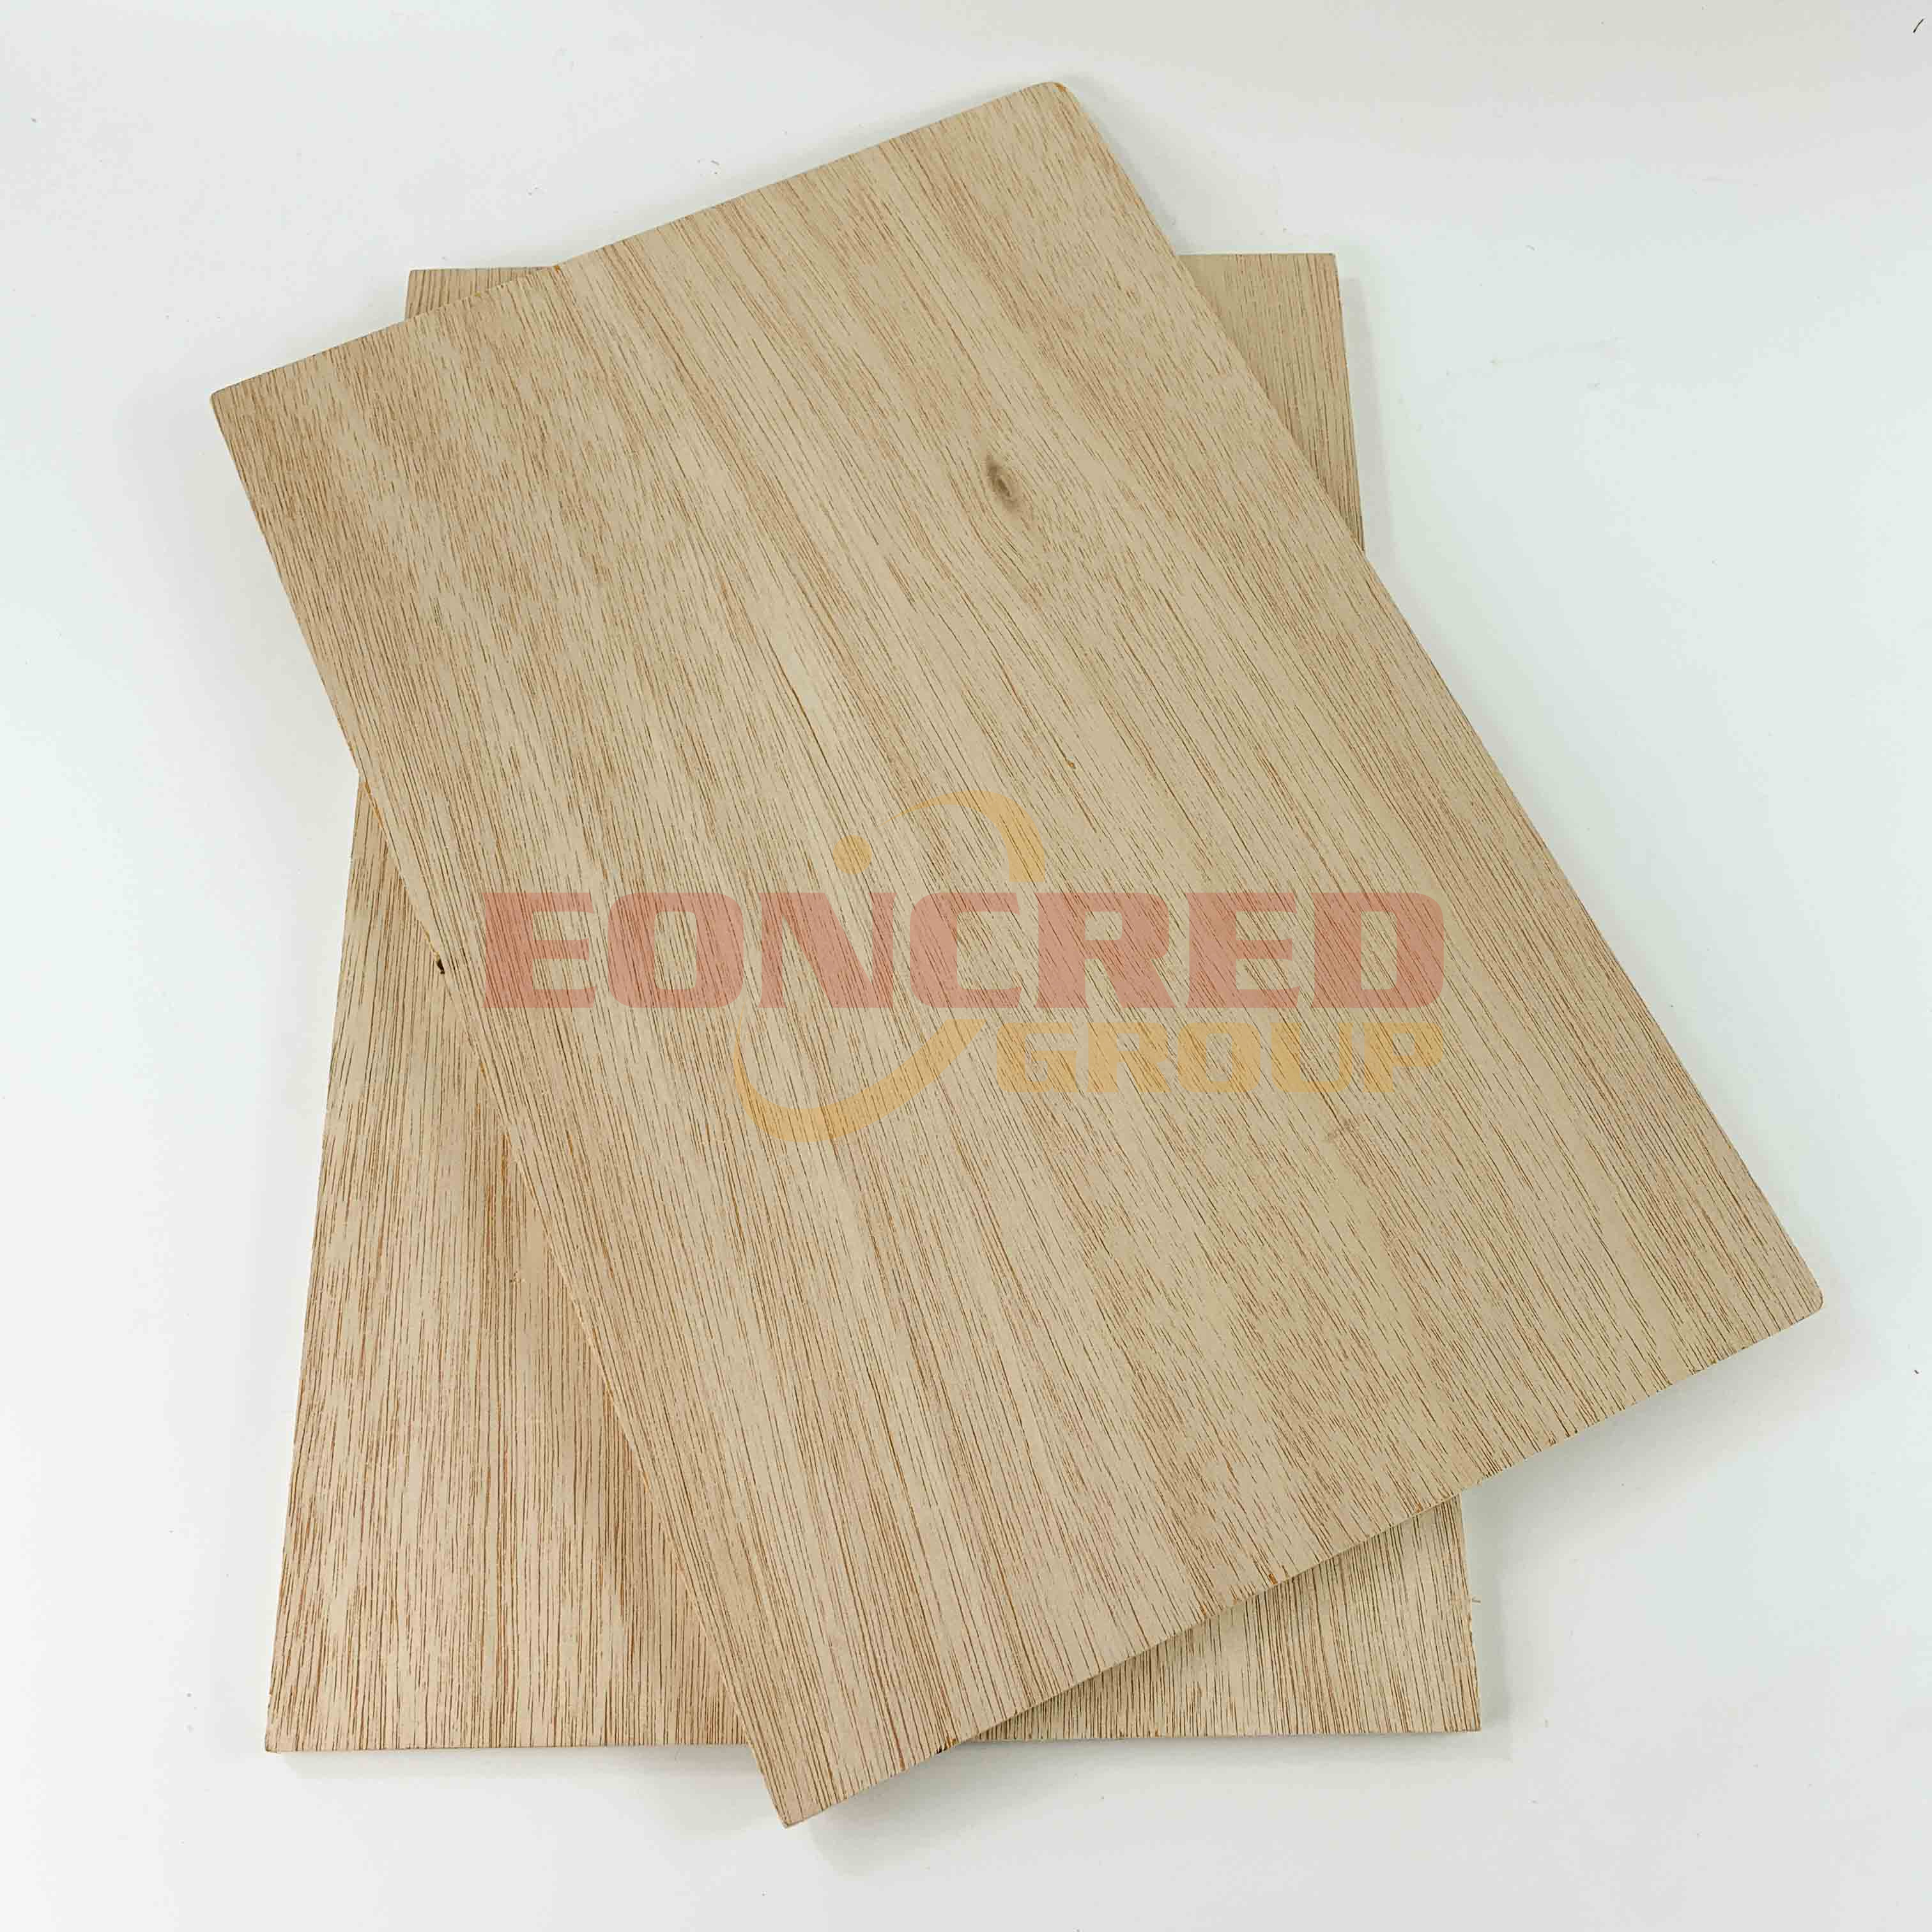 Good Quality Commercial 13mm Plywood For Furniture 